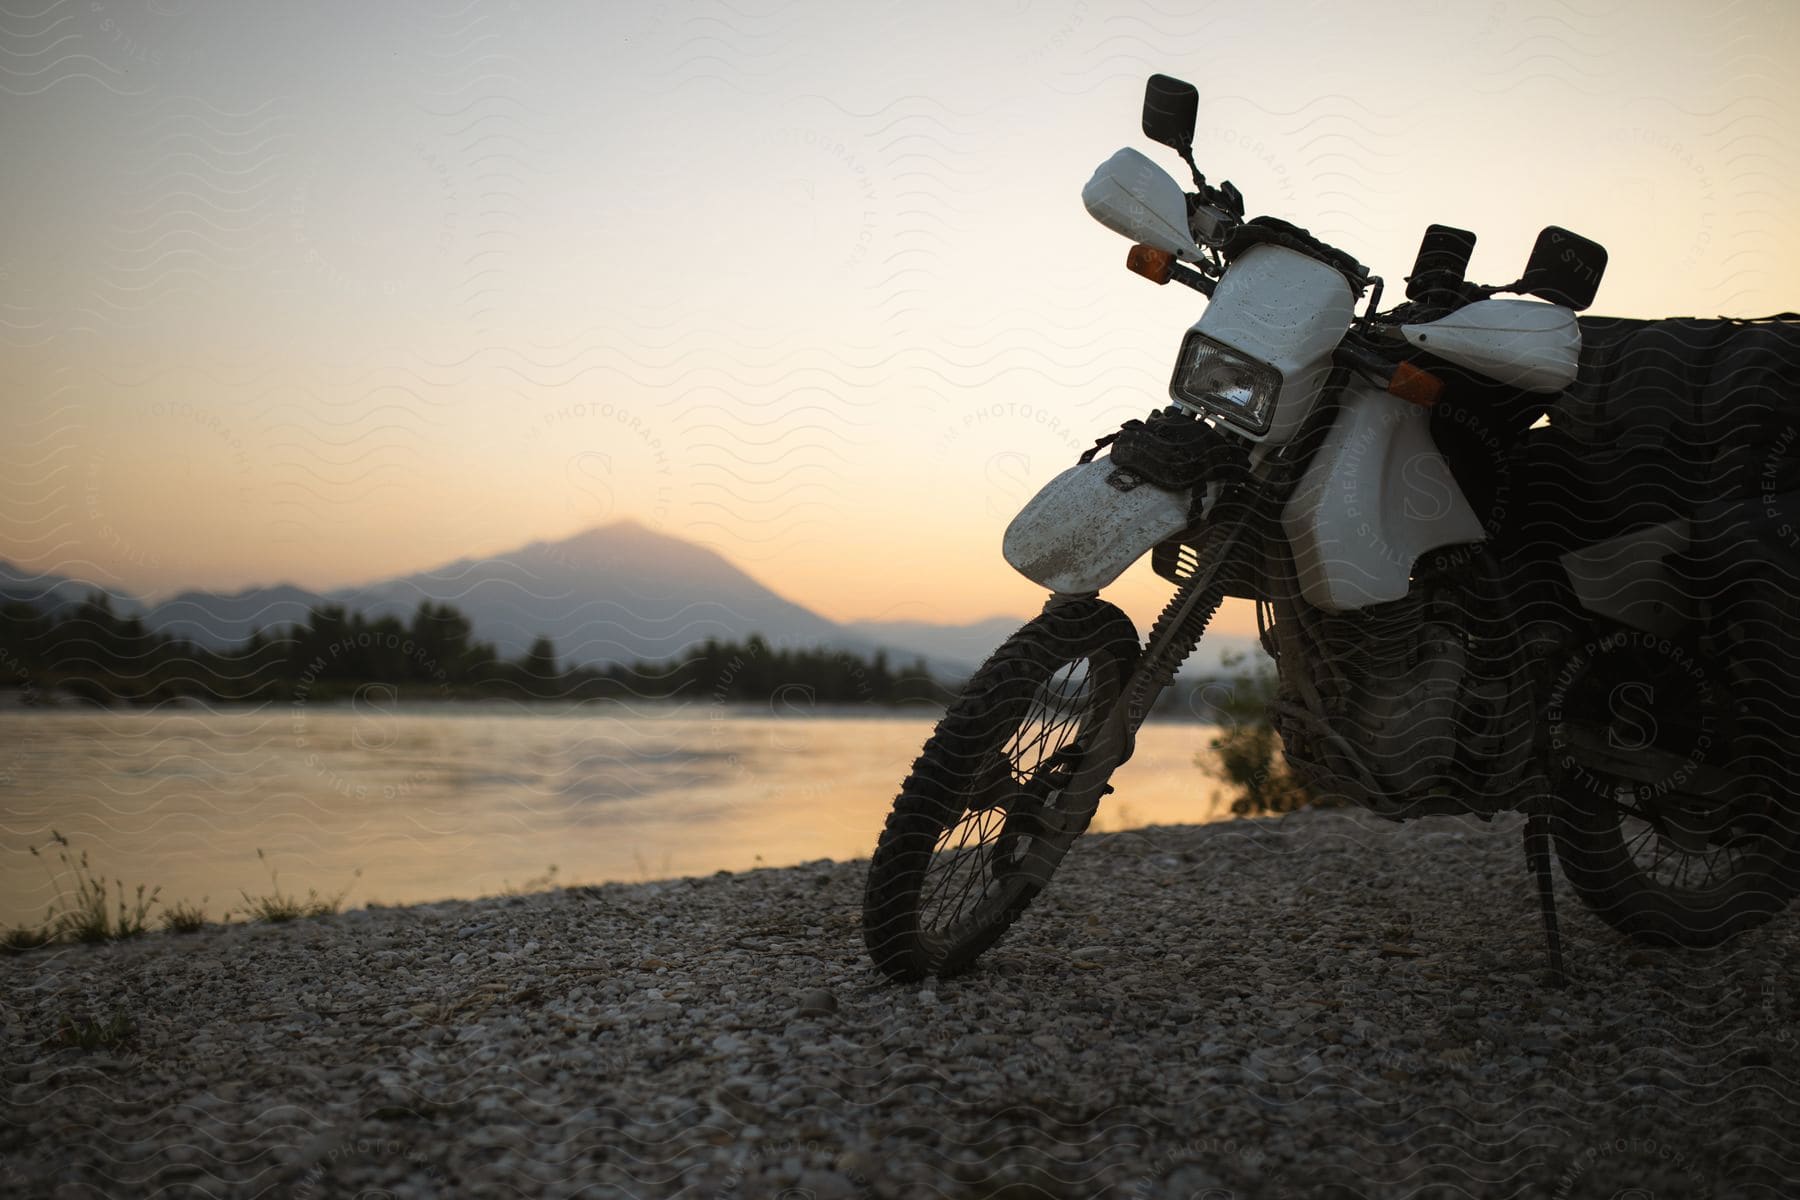 A white motorcycle stands along the shore with trees and a mountain across the river under a hazy sky